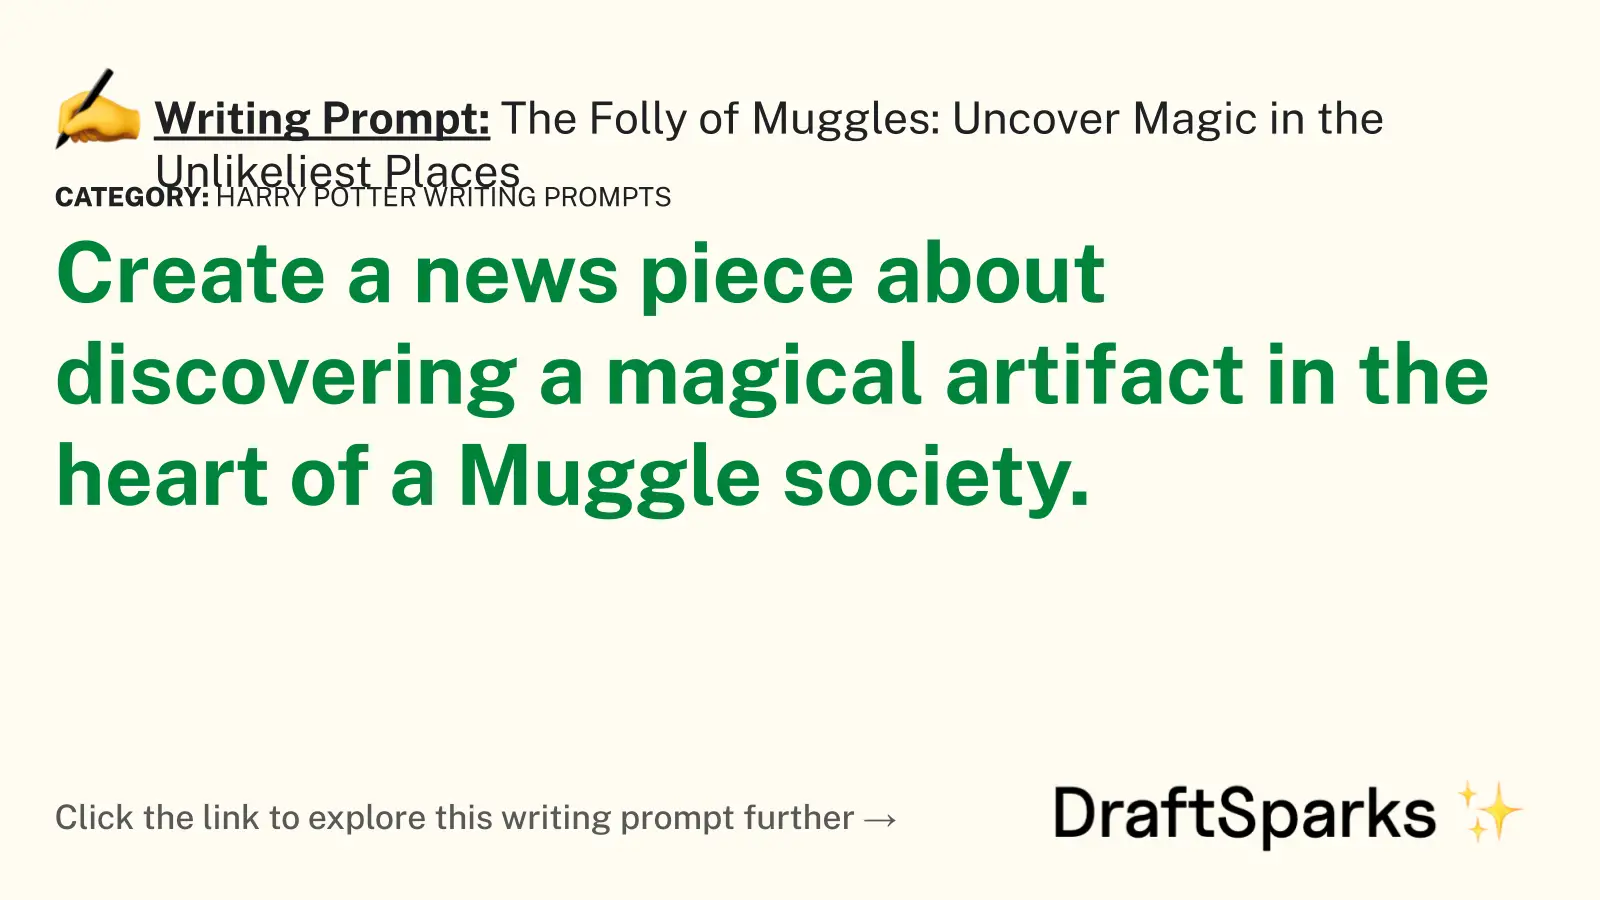 The Folly of Muggles: Uncover Magic in the Unlikeliest Places